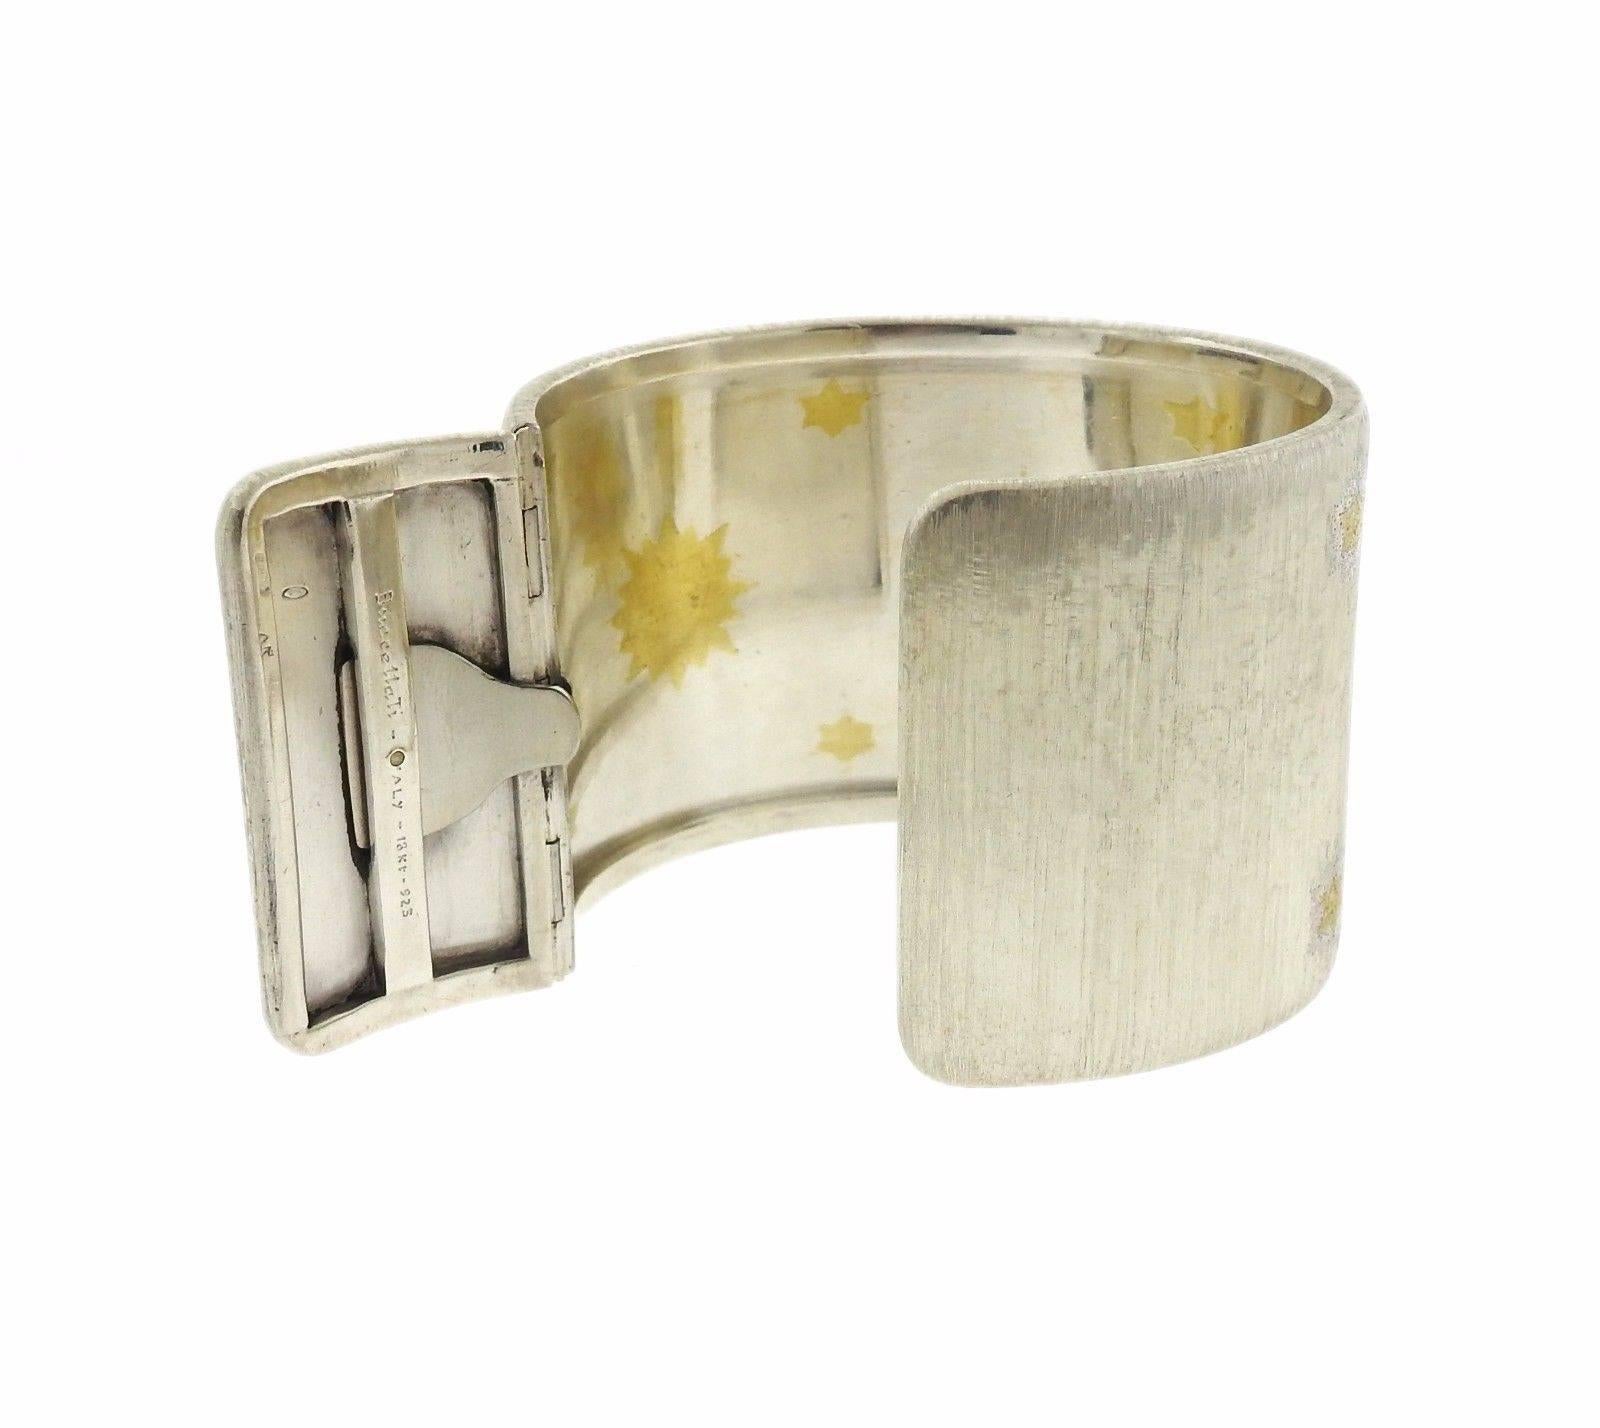 An 18k gold and sterling silver wide cuff bracelet by Buccellati.  The bracelet measures 44mm wide and will fit up to a 6.75